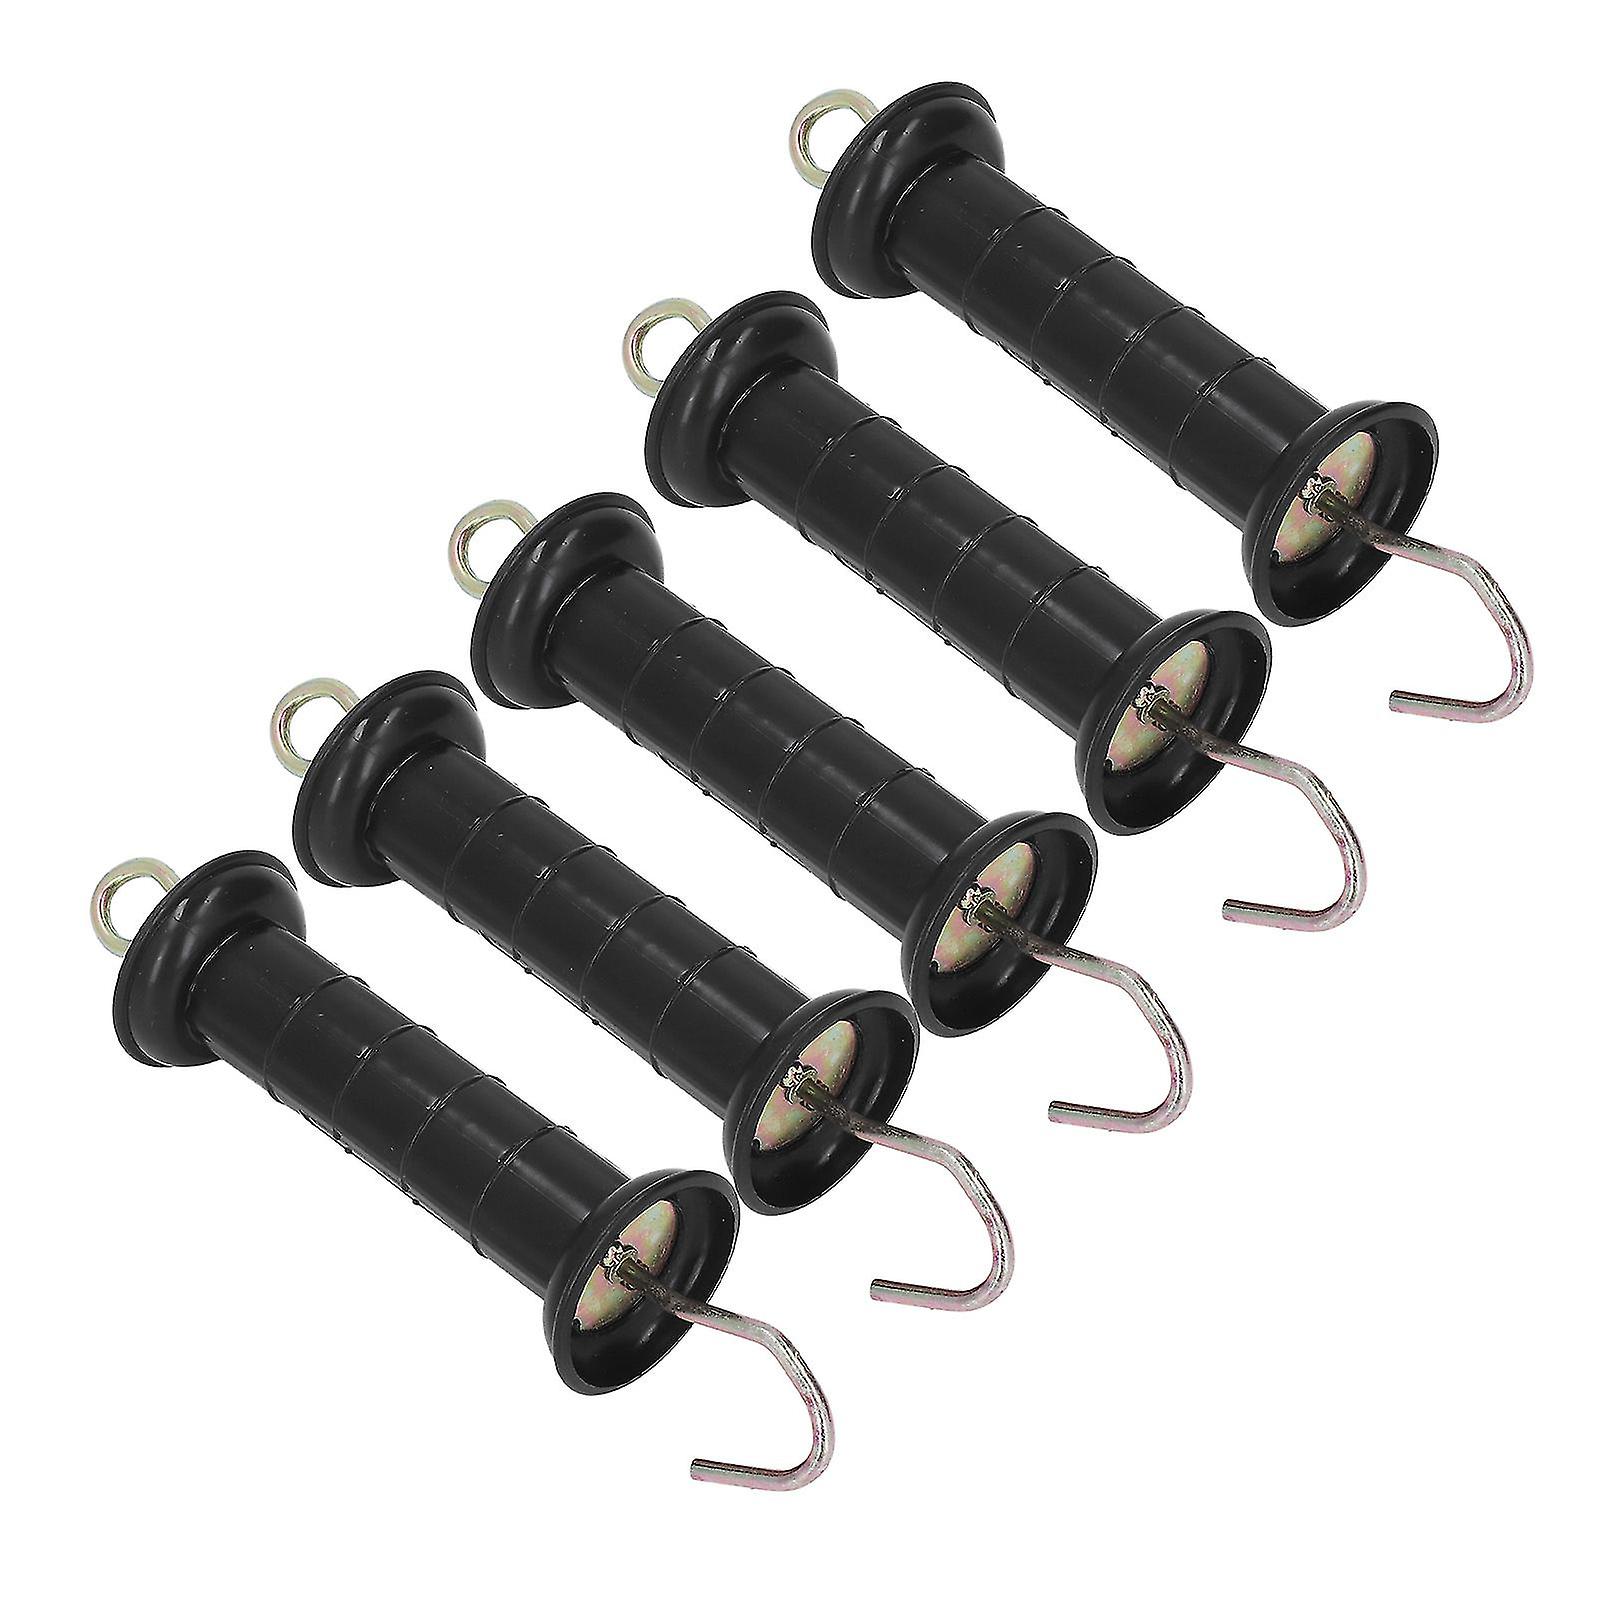 5Pcs Electric Fence Handle Insulated Gate Grip Bar with Metal Hook for Farm Pasture